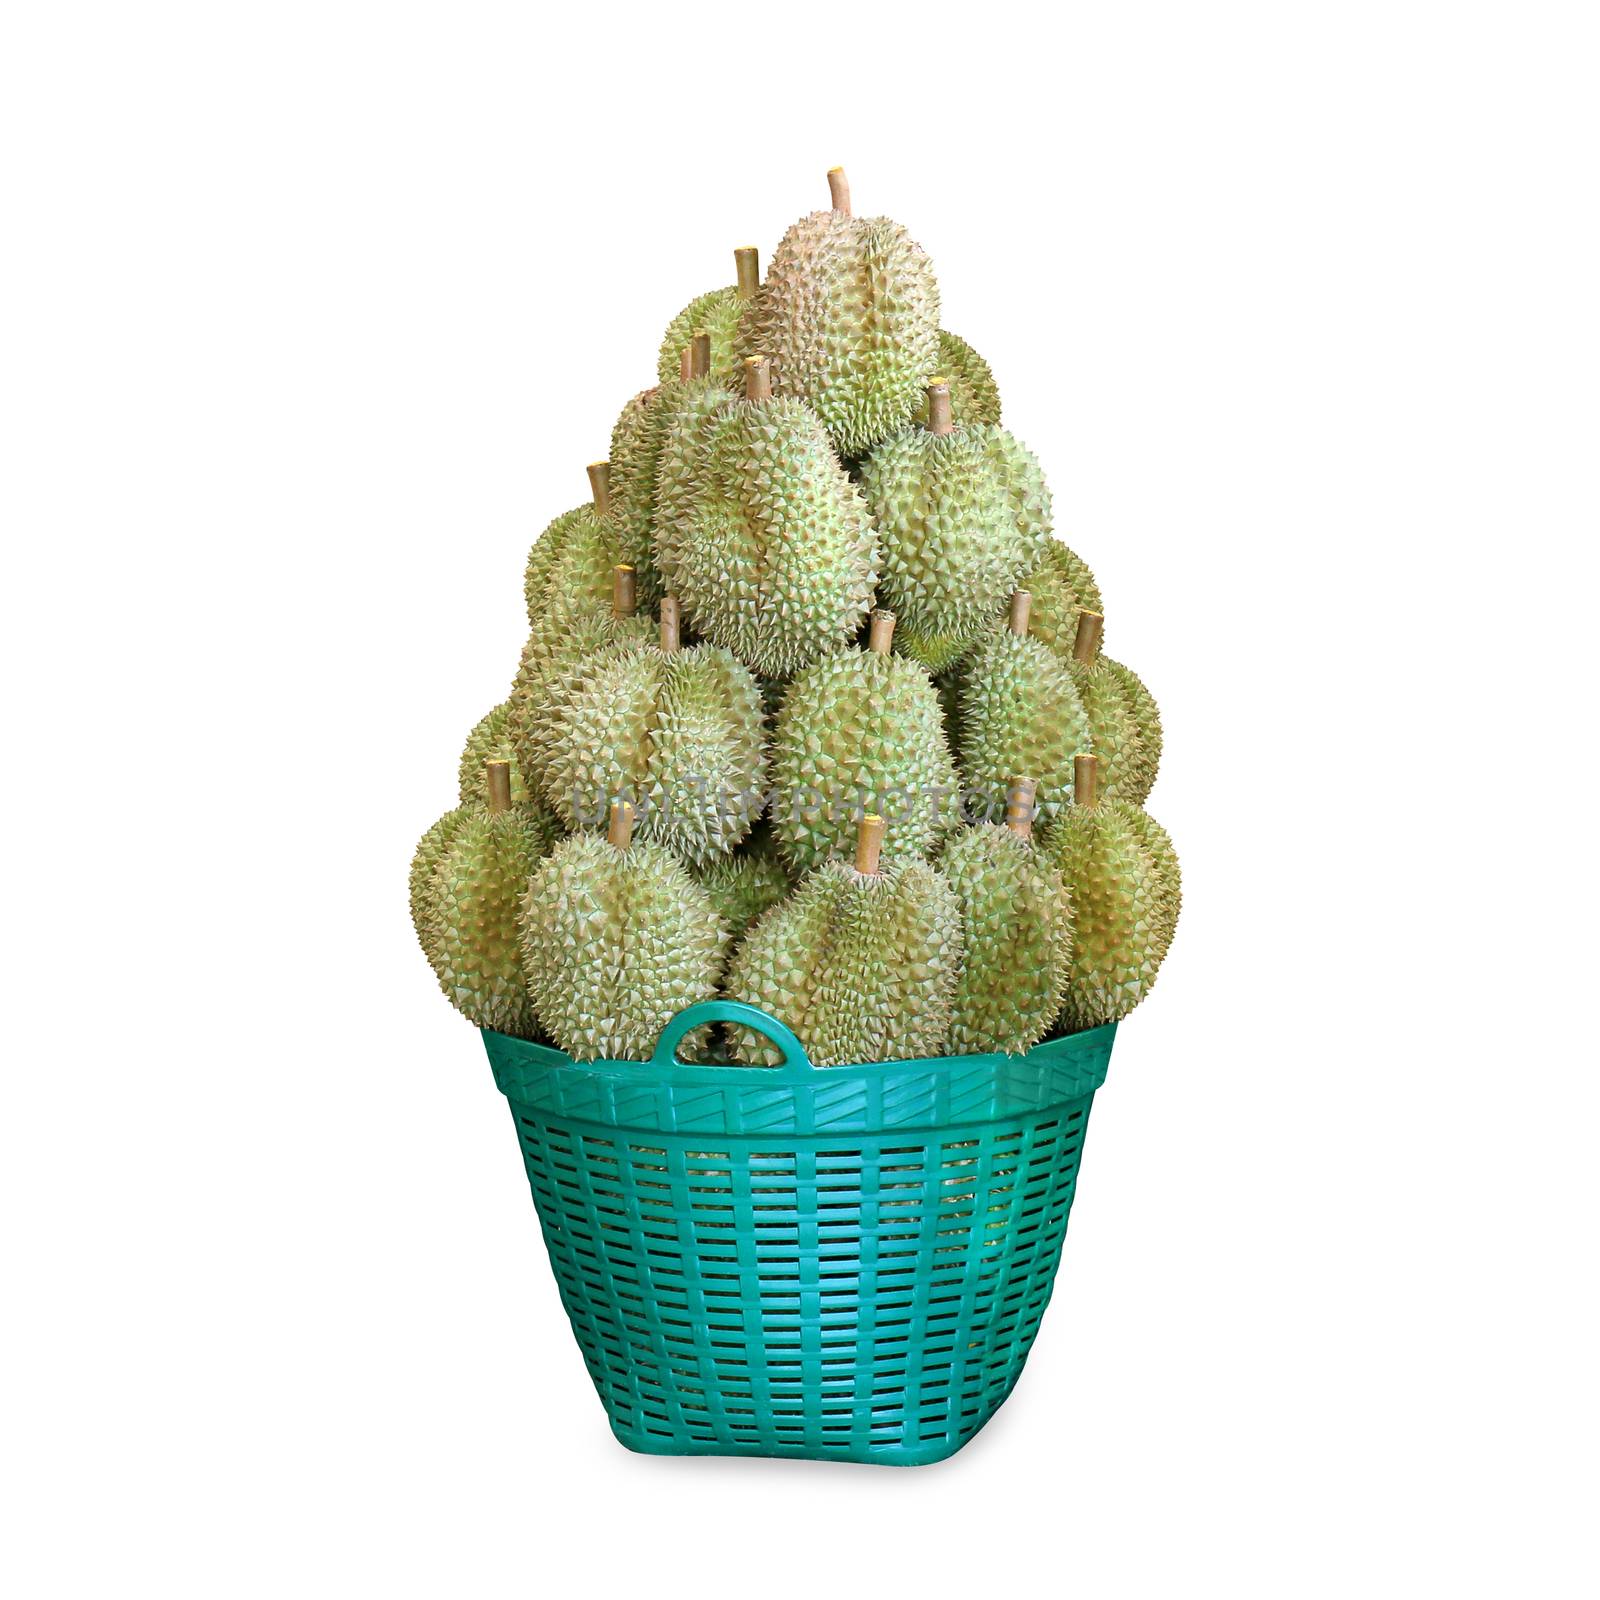 Pile of Durian, Durian fruit in a green basket for sale, Durian is king of fruits southeast Thailand, Durian many in basket sale on white background by cgdeaw